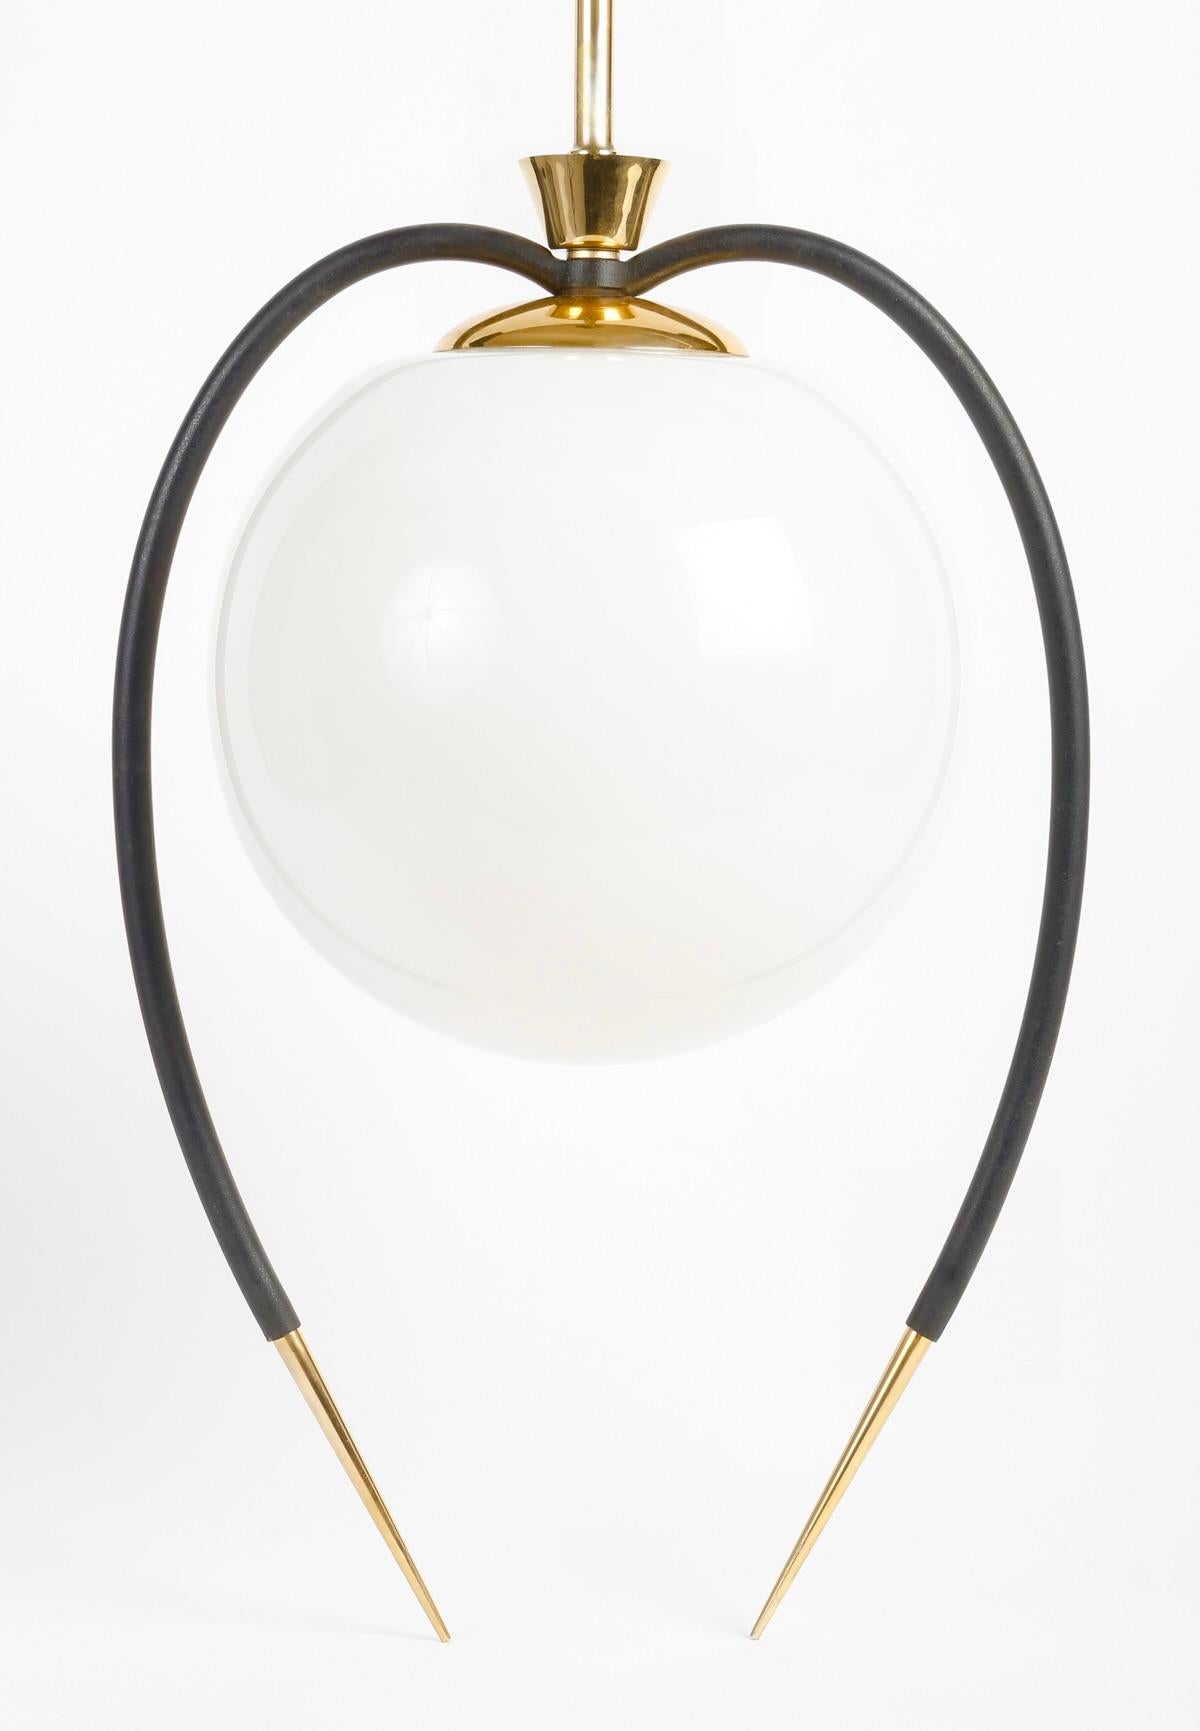 Composed of a central rod acting as a gilded brass light arm, dressed on the side with a round opalescent globe framed by two black wrought-iron rods curved downwards and embellished at their ends with fine gilded brass spikes held on the luminaire